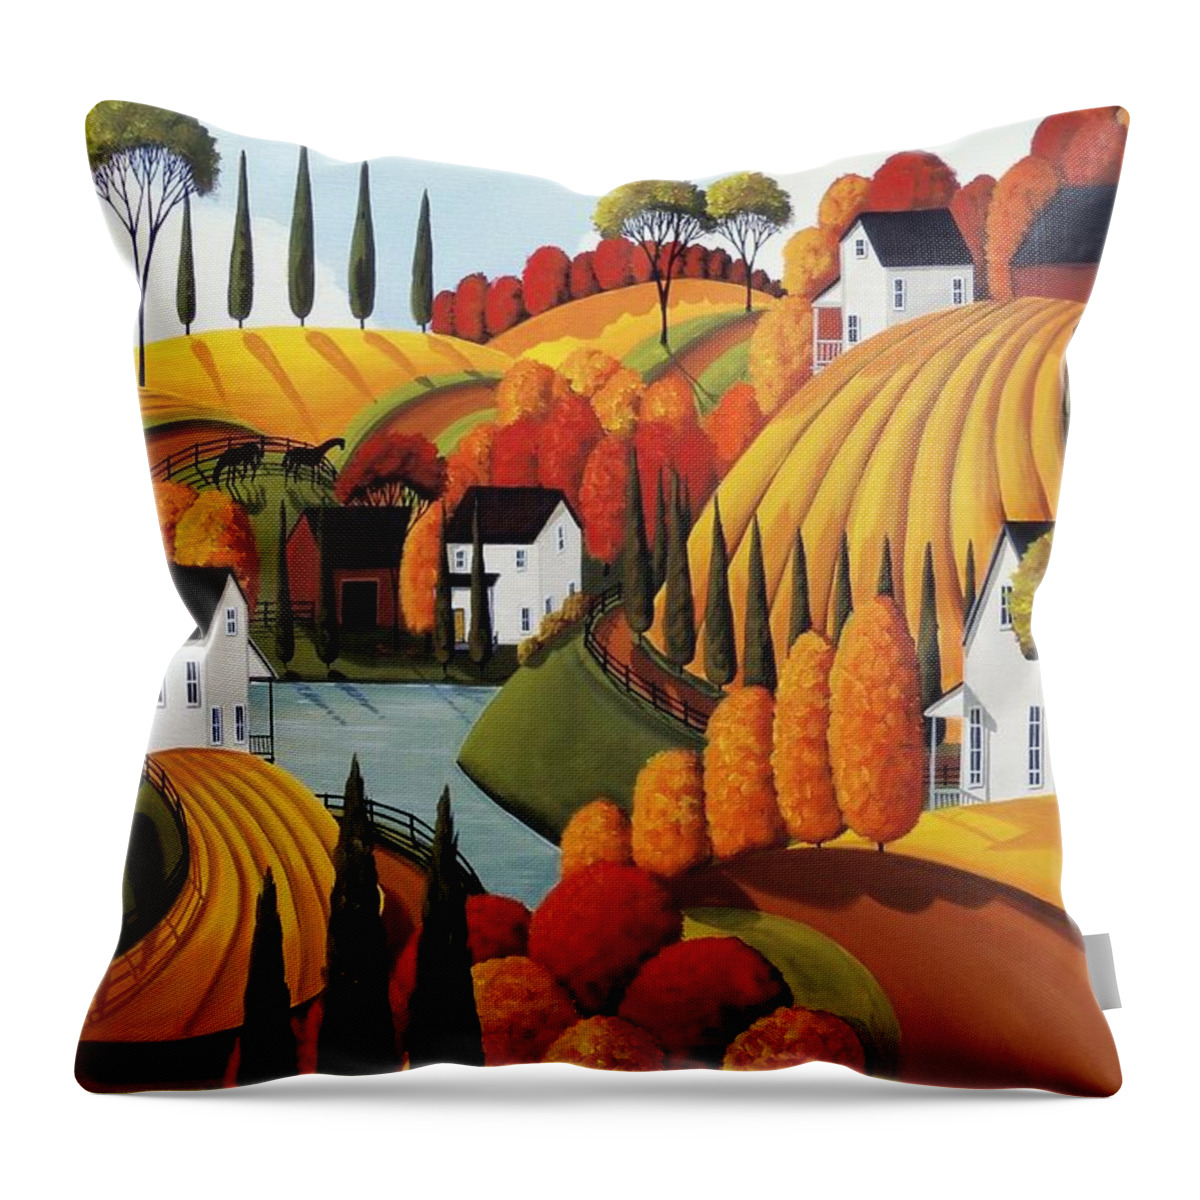 Autumn Throw Pillow featuring the painting Autumn Glory by Debbie Criswell